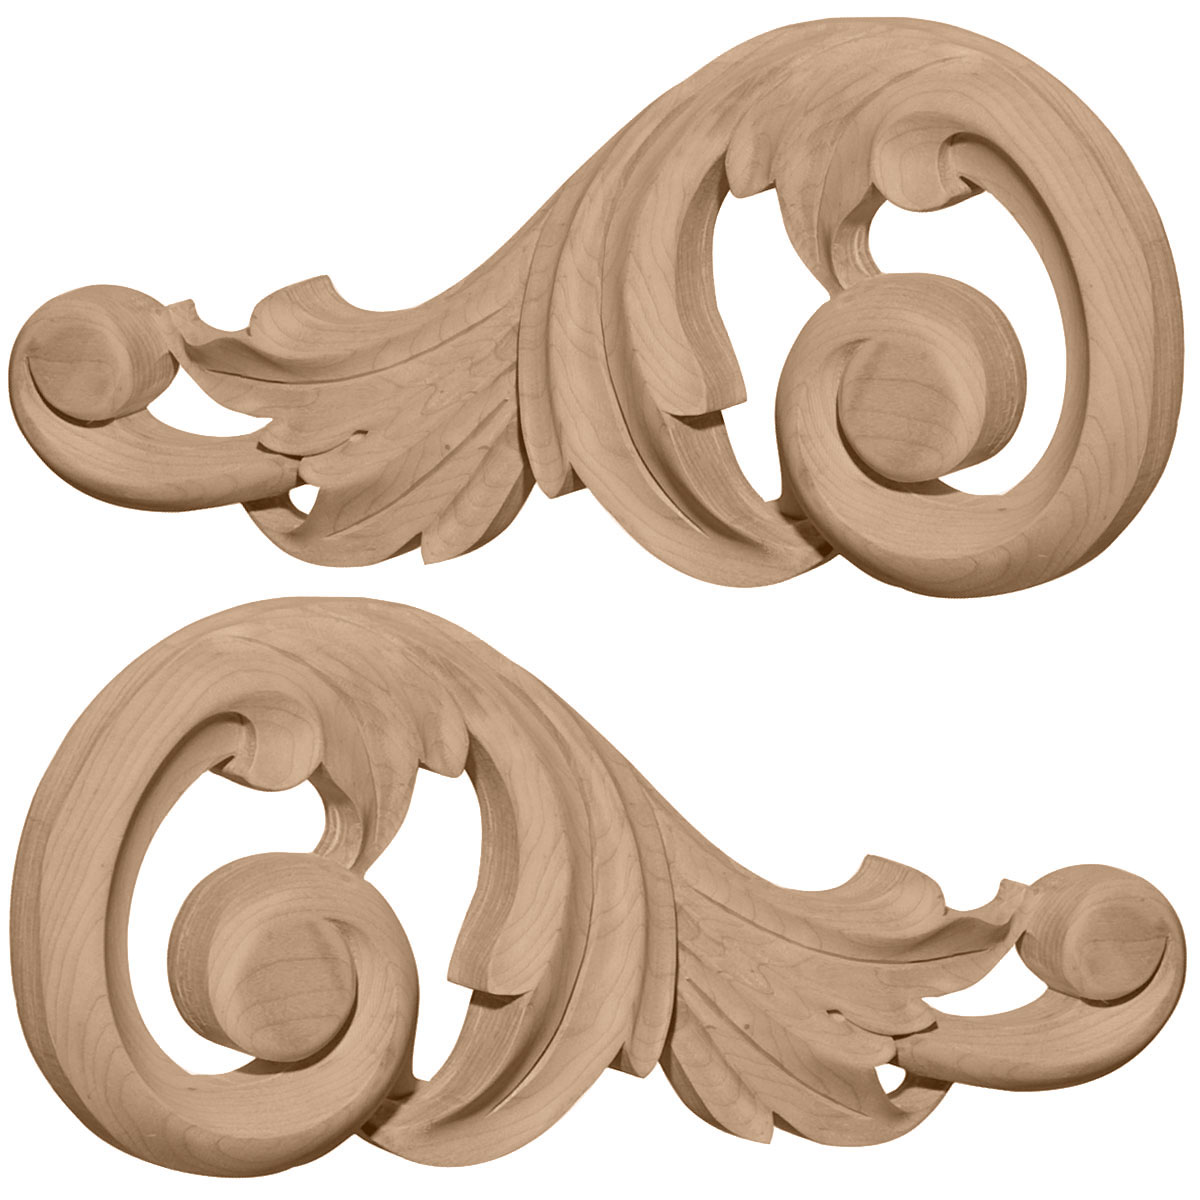 Decorative chic acanthus scroll onlay resin furniture moulding applique AC1 